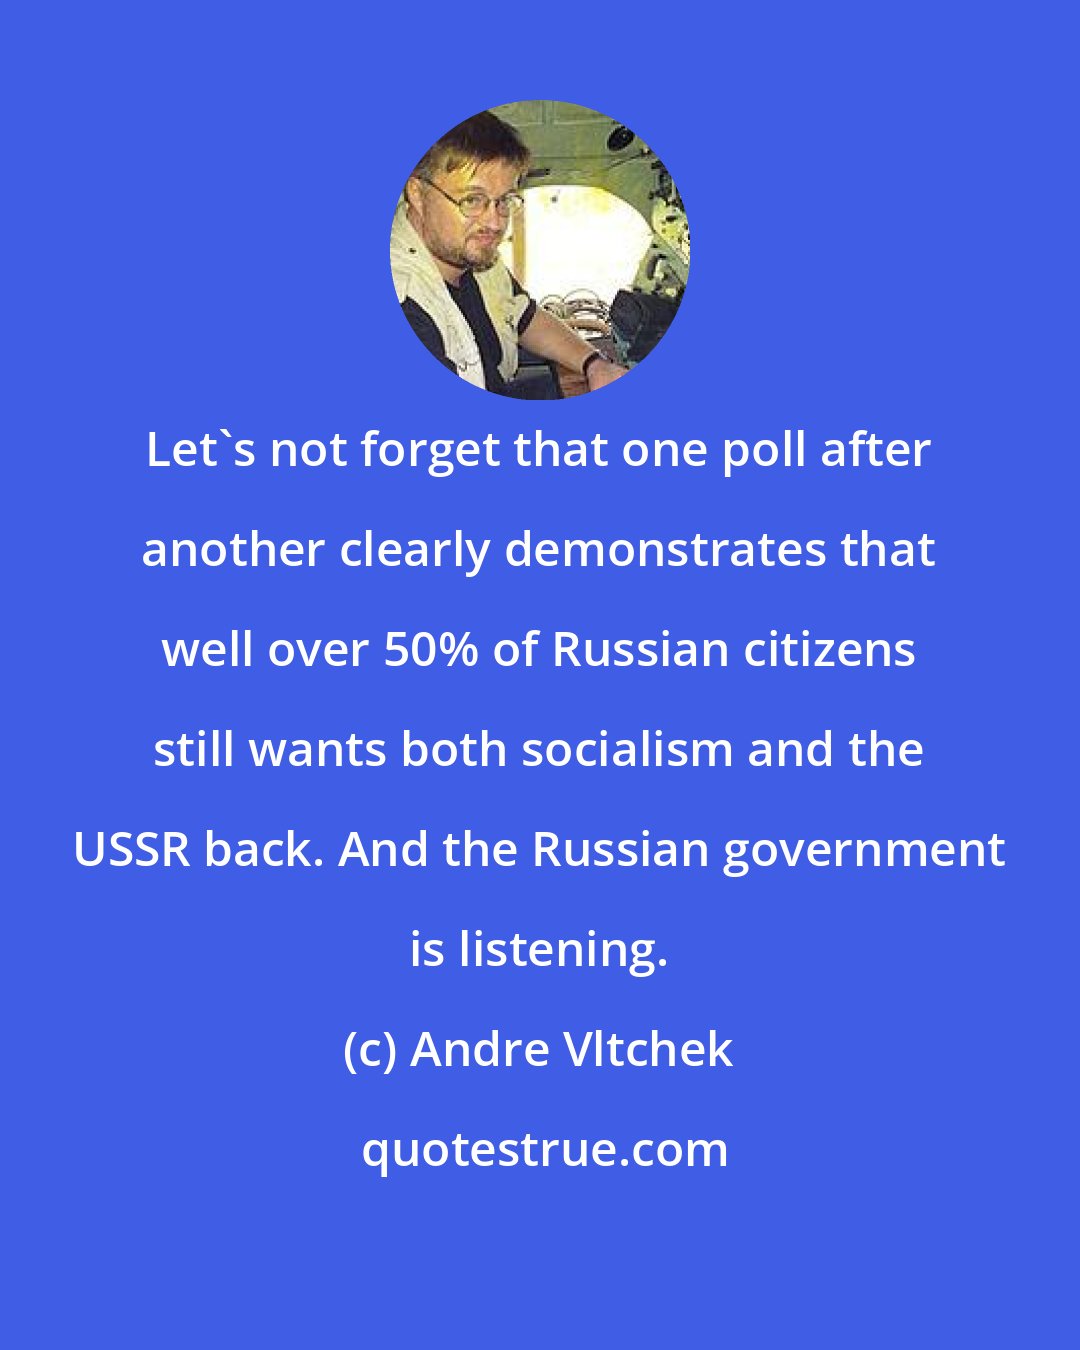 Andre Vltchek: Let's not forget that one poll after another clearly demonstrates that well over 50% of Russian citizens still wants both socialism and the USSR back. And the Russian government is listening.